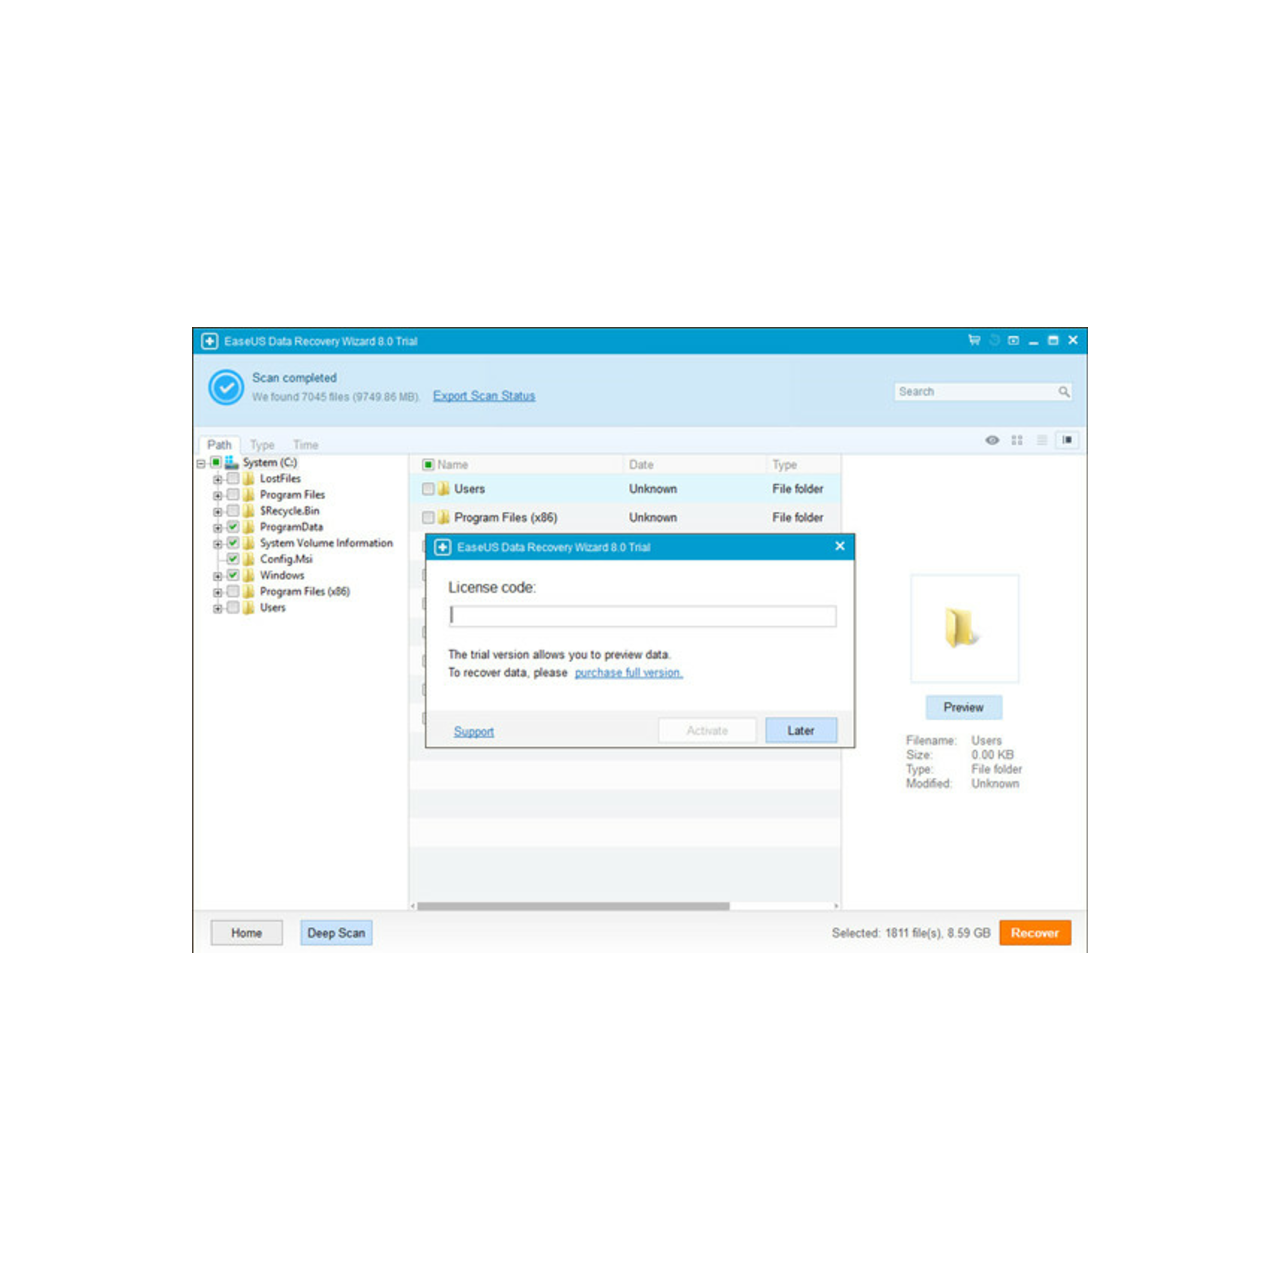 easeus data recovery wizard professional 12.0